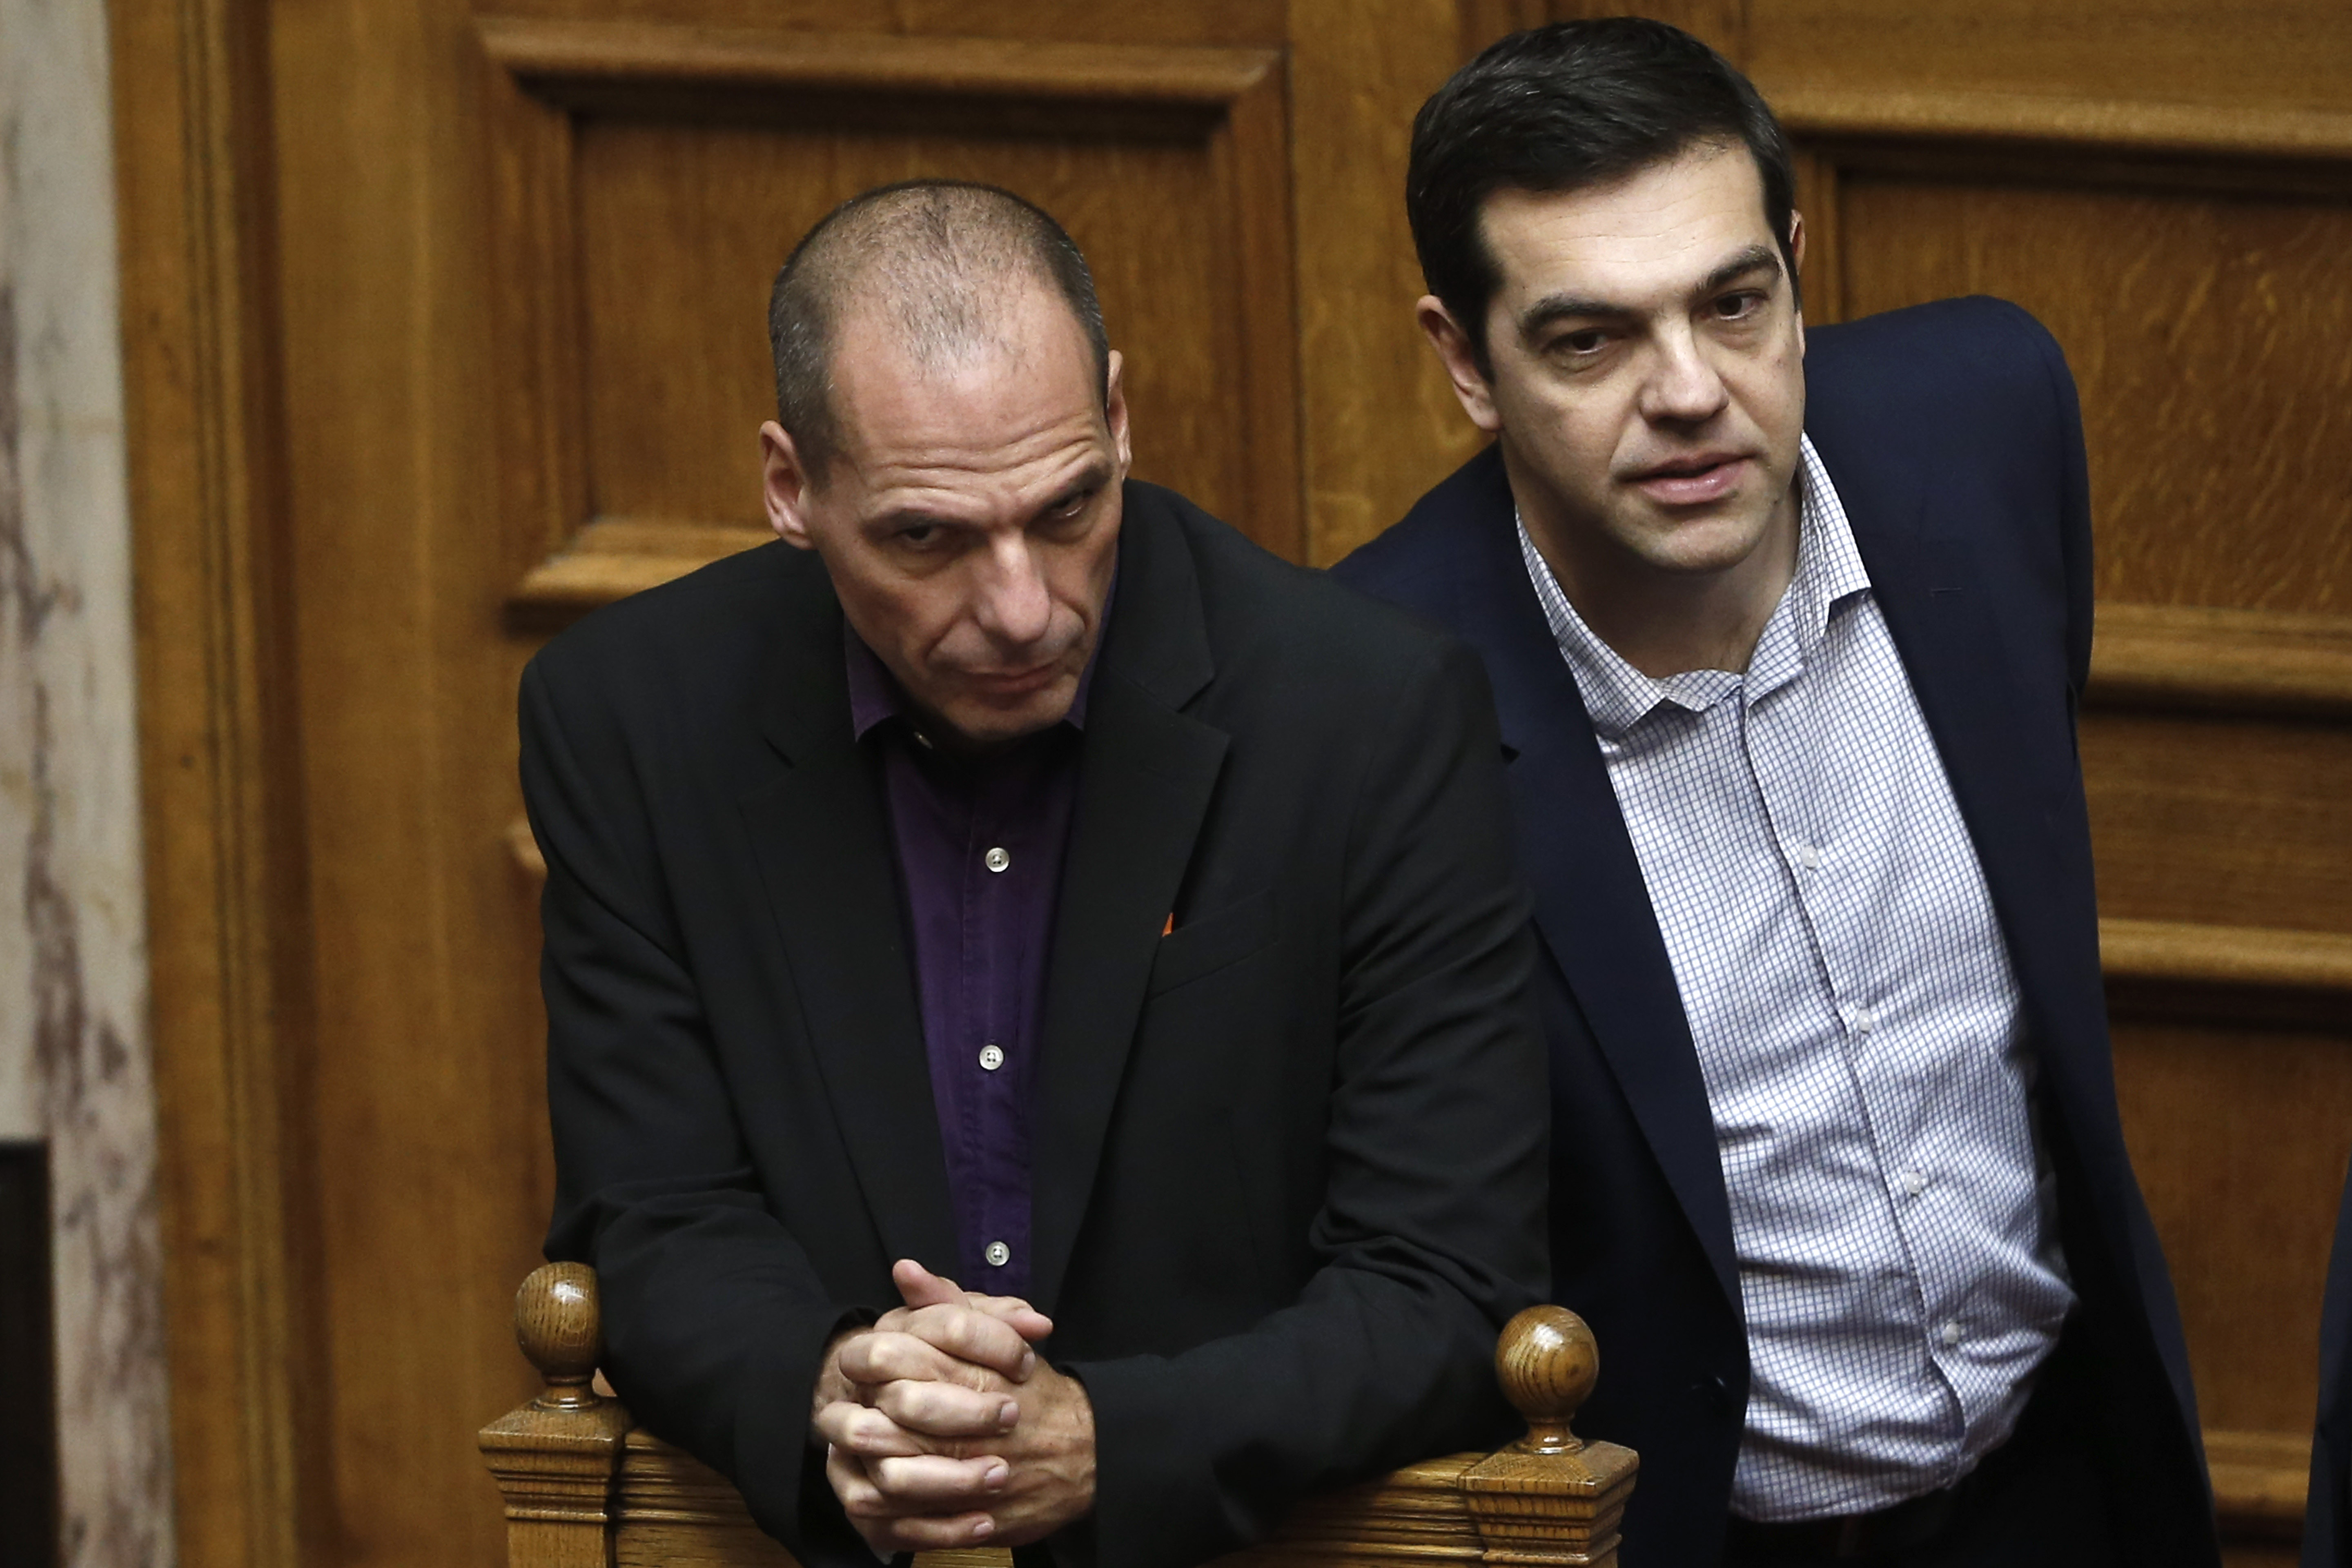 Greek Prime Minister Alexis Tsipras (right) and his Finance Minister Yanis Varoufakis play their roles well. Photo: AP